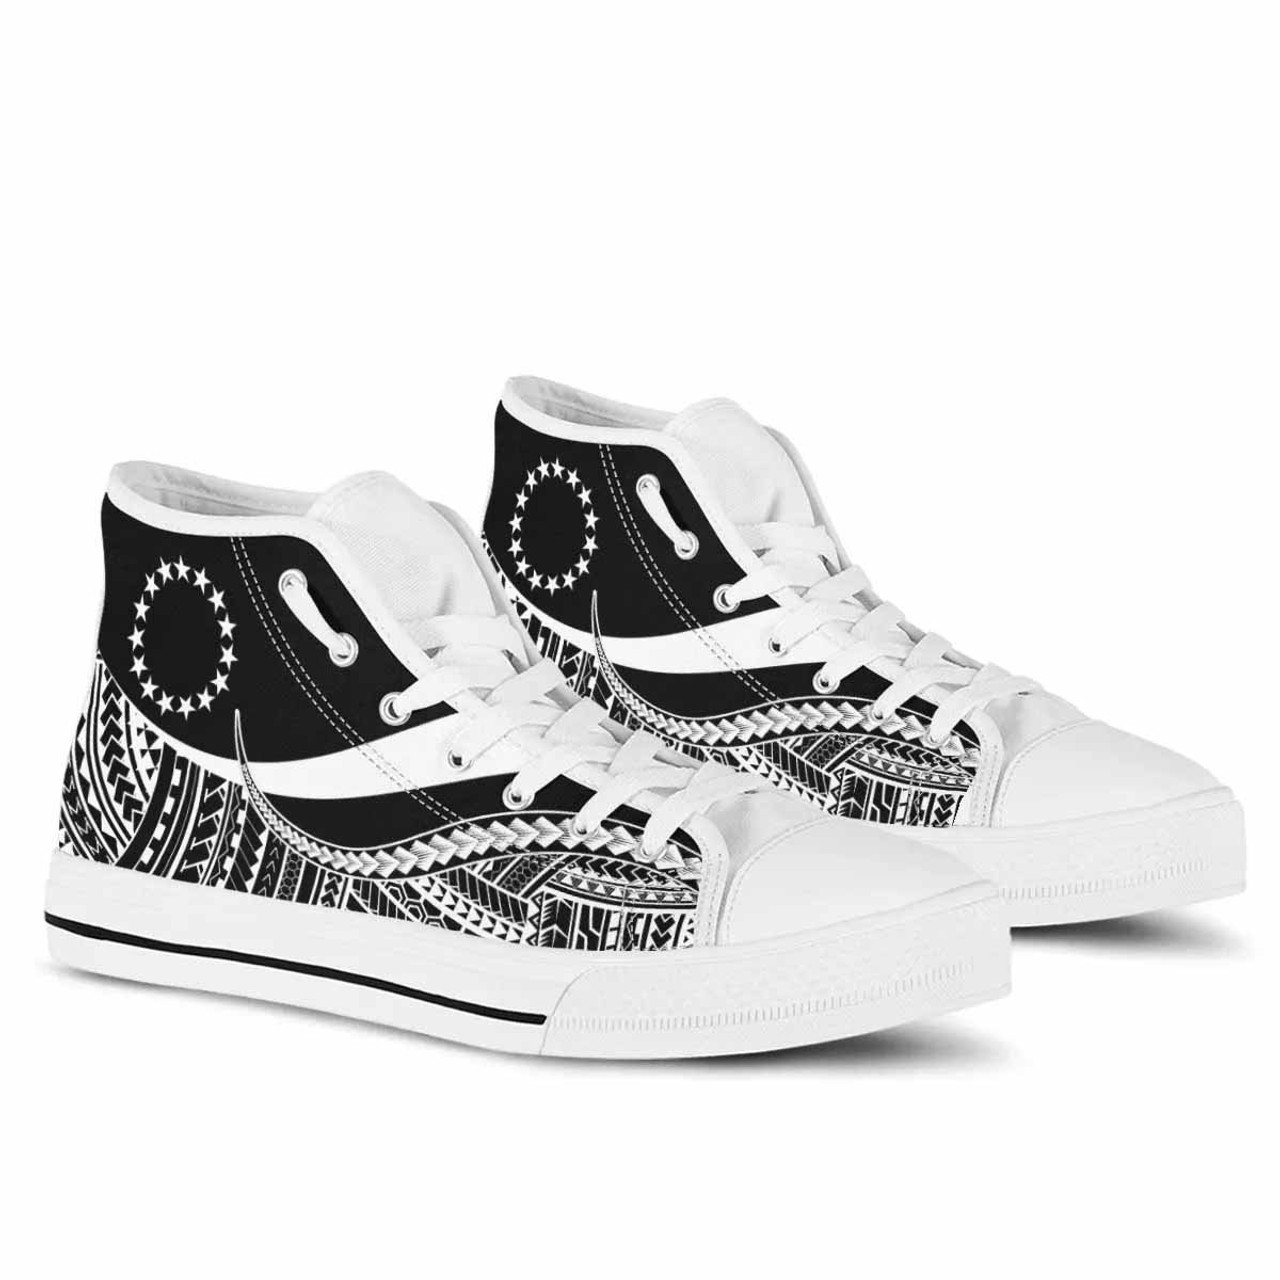 Cook Islands High Top Shoes White - Polynesian Tentacle Tribal Pattern 6